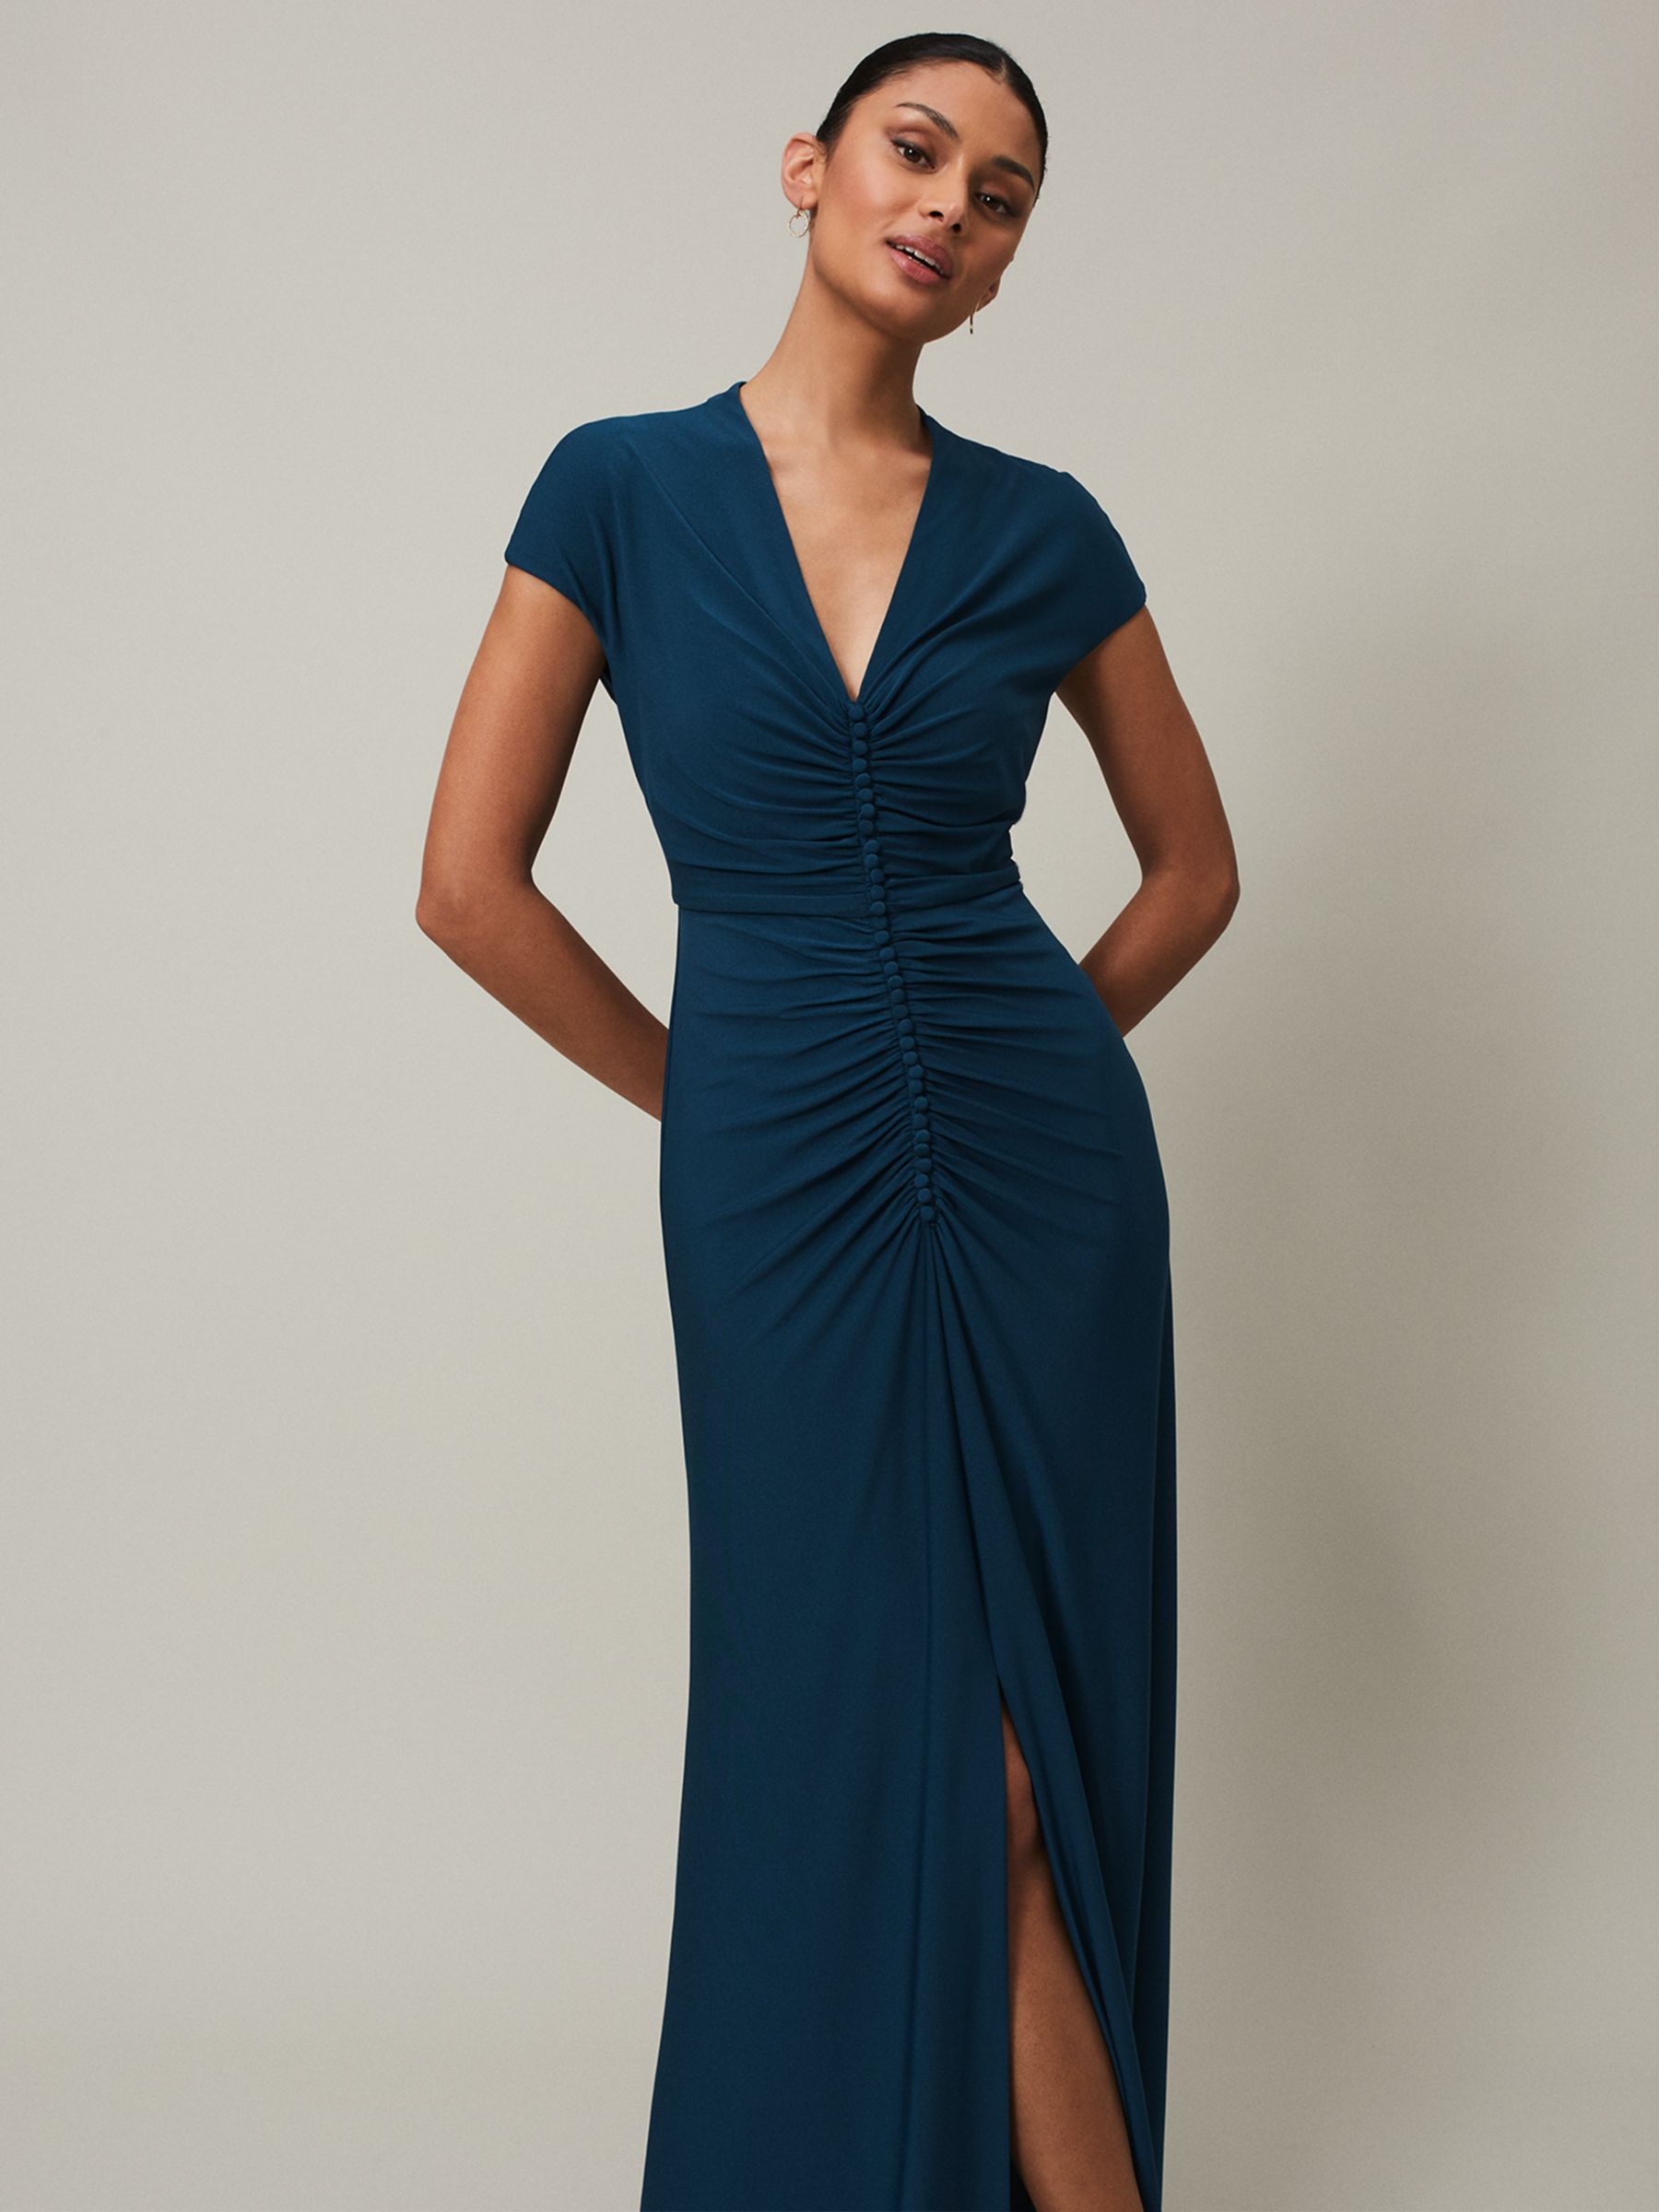 Buy Phase Eight Daisy Ruched Maxi Dress, Teal Online at johnlewis.com